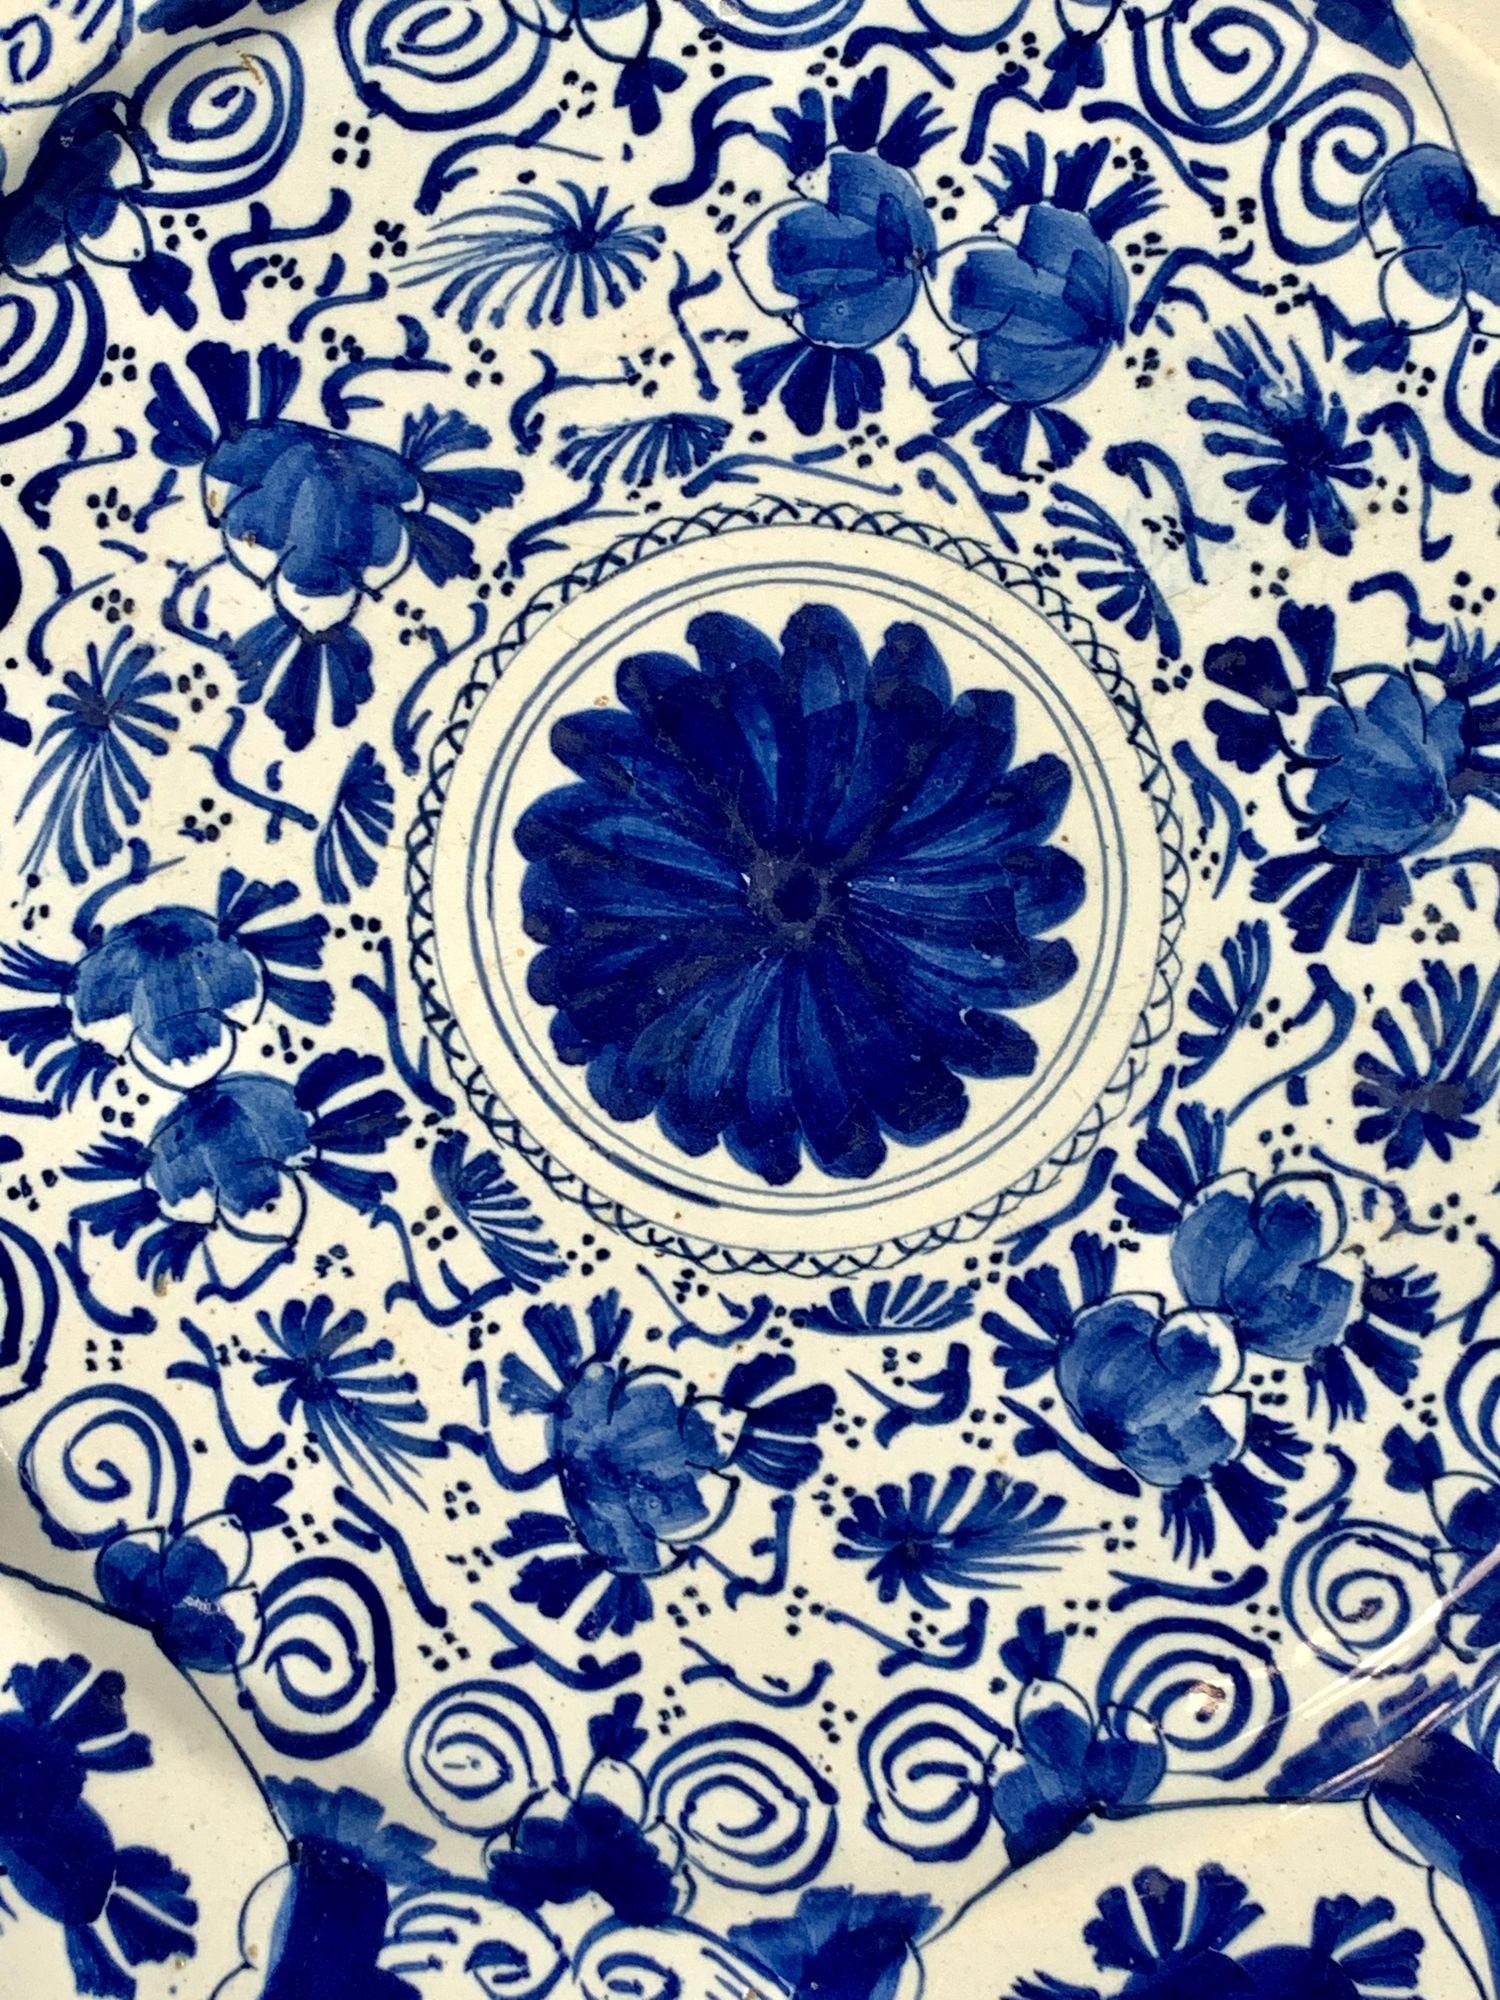 This beautiful blue and white Dutch Delft charger was hand-painted circa 1770.
The center of the charger is decorated with a large cobalt blue flower.
Beyond the center, we see two circles of tulip buds, leaves, and scrolling vines.
The vibrant